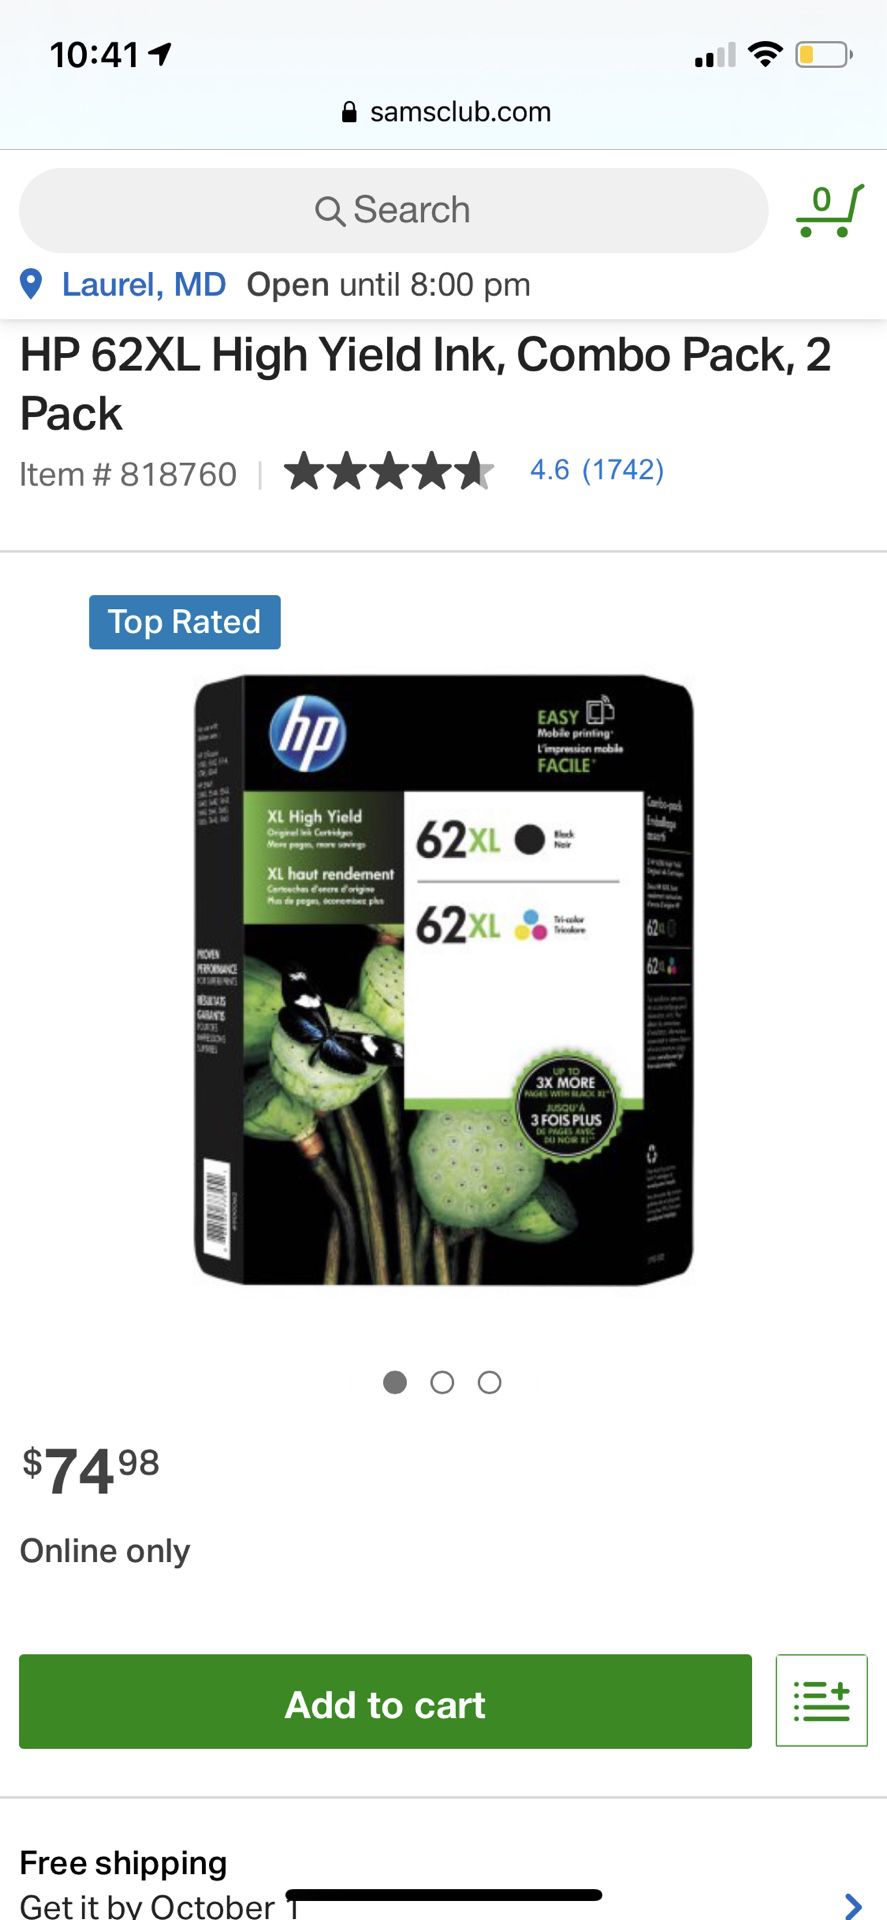 62XL combo pack, 2 pack HP printer ink